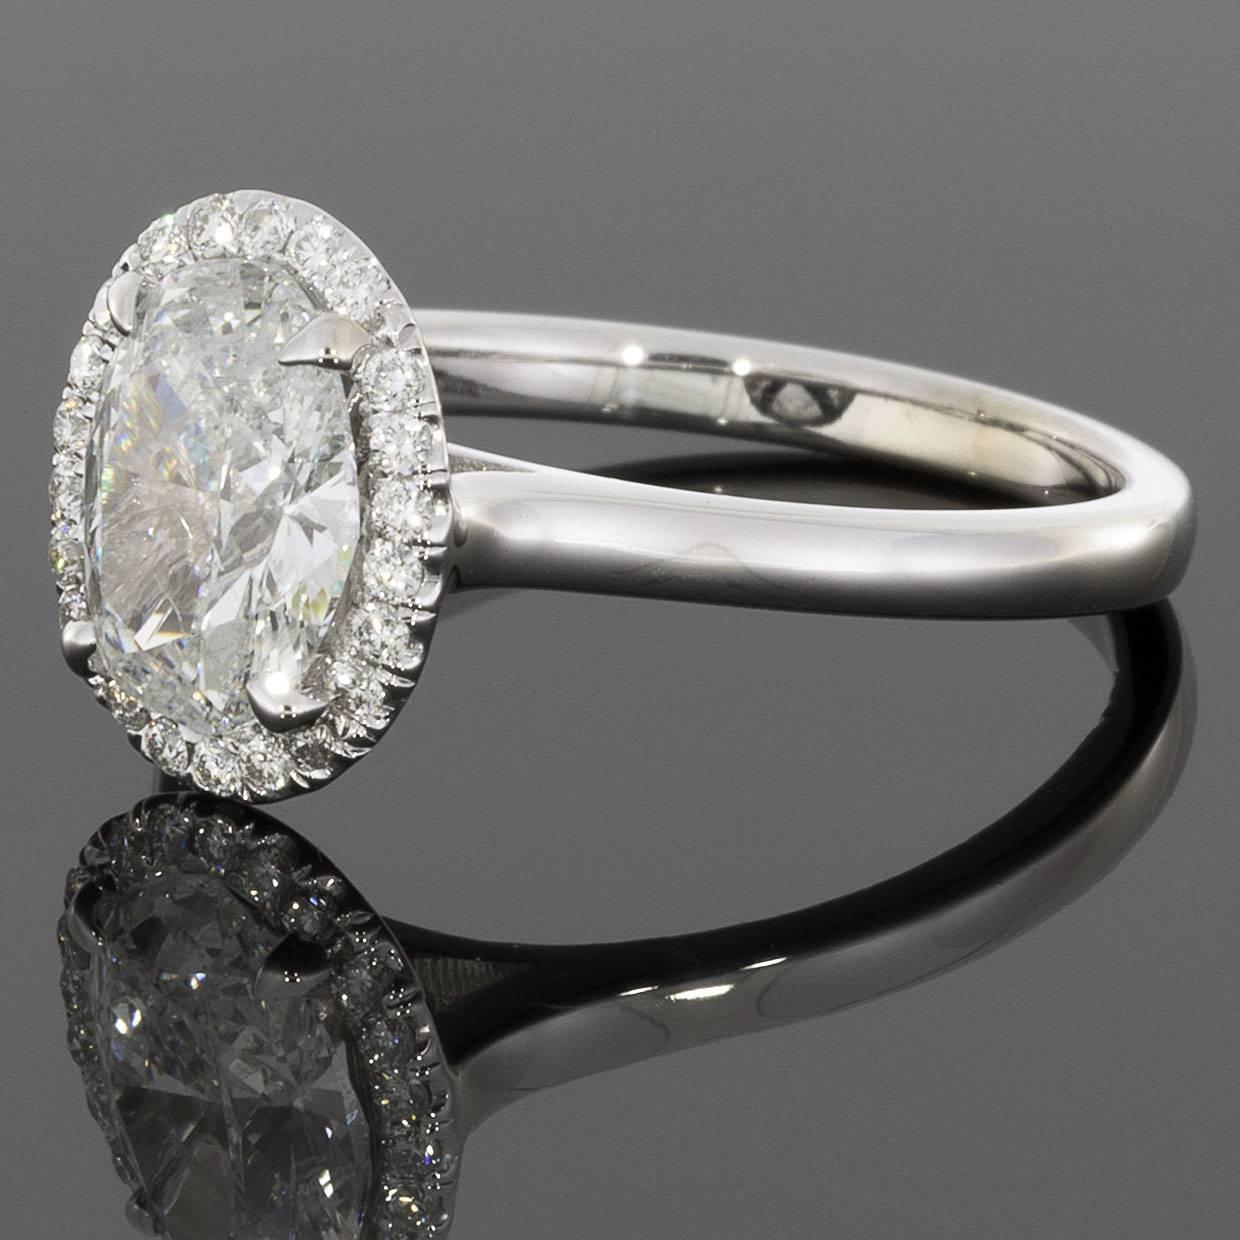 This stunning diamond ring is simply breathtaking! The center diamond is a 1.40 carat, oval brilliant cut diamond that is GIA certified as F/I1 in quality. This beautiful, colorless diamond is prong set in a white gold ring that was custom made to